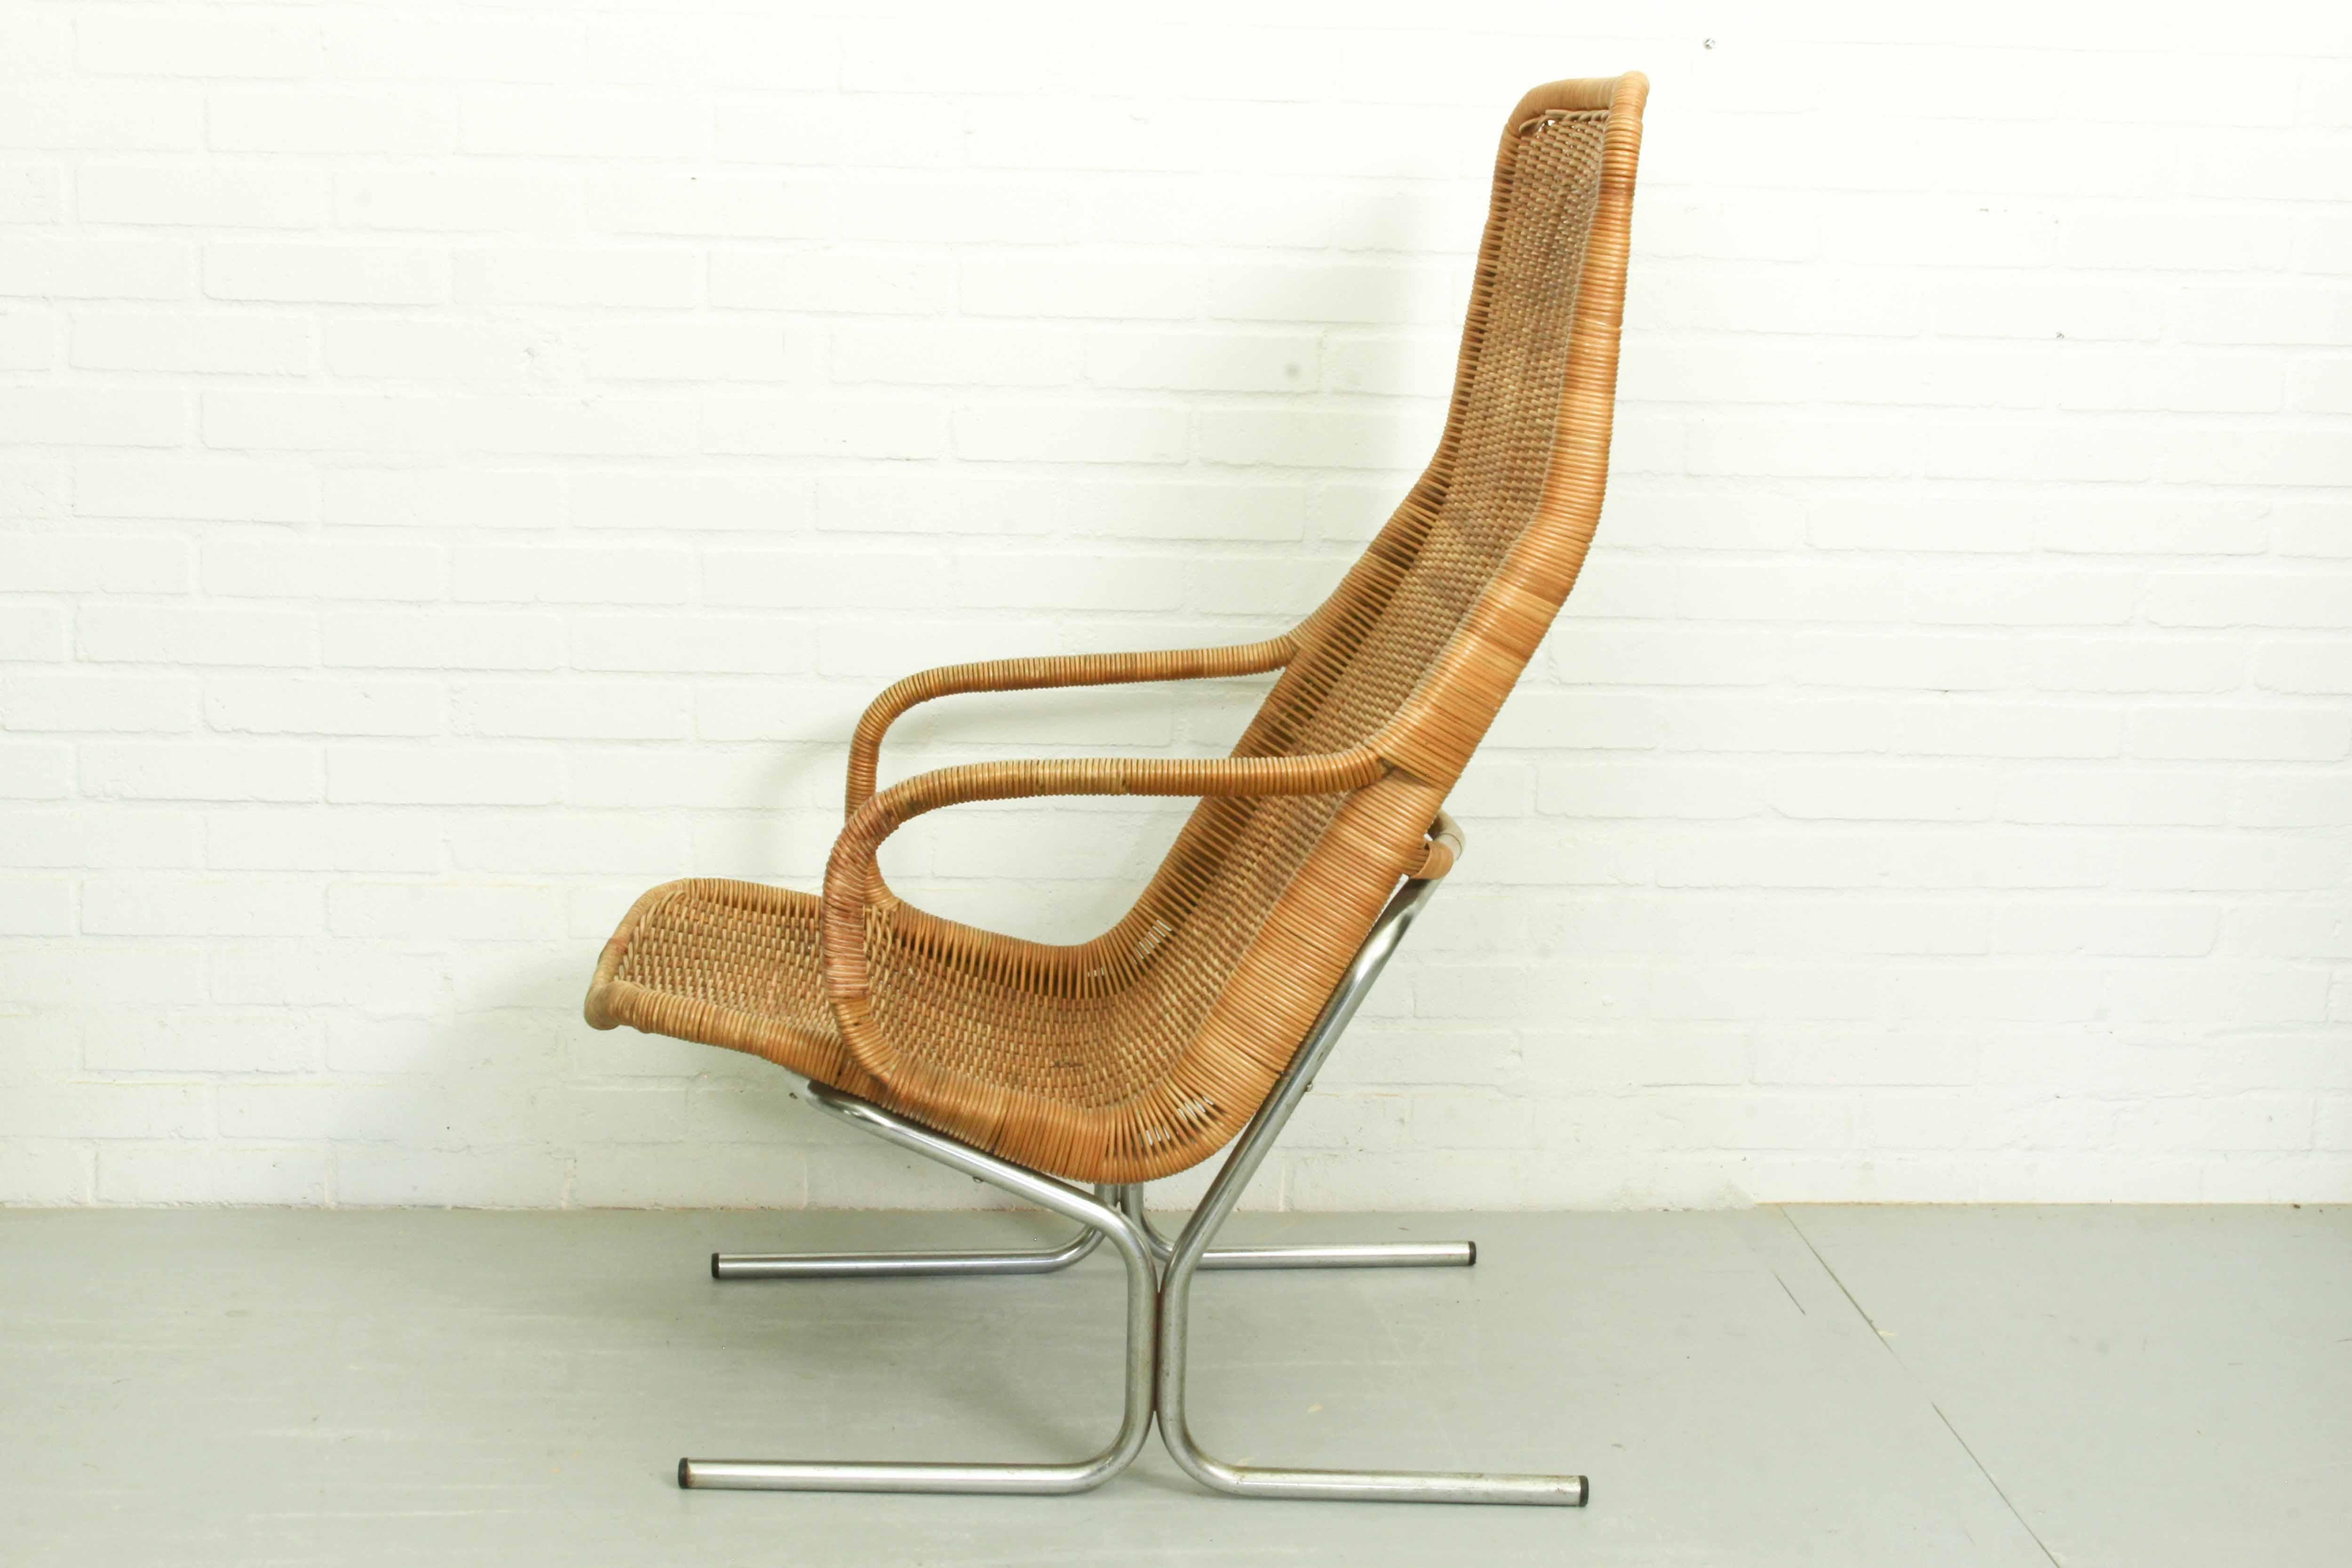 Armchair (model 514c) designed by Dirk van Sliedregt for Jonker Brothers, 1960 Netherlands. Chromed metal frame with rattan seat. Good vintage condition with some traces of use and old repairs in the rattan seat (see also photos).